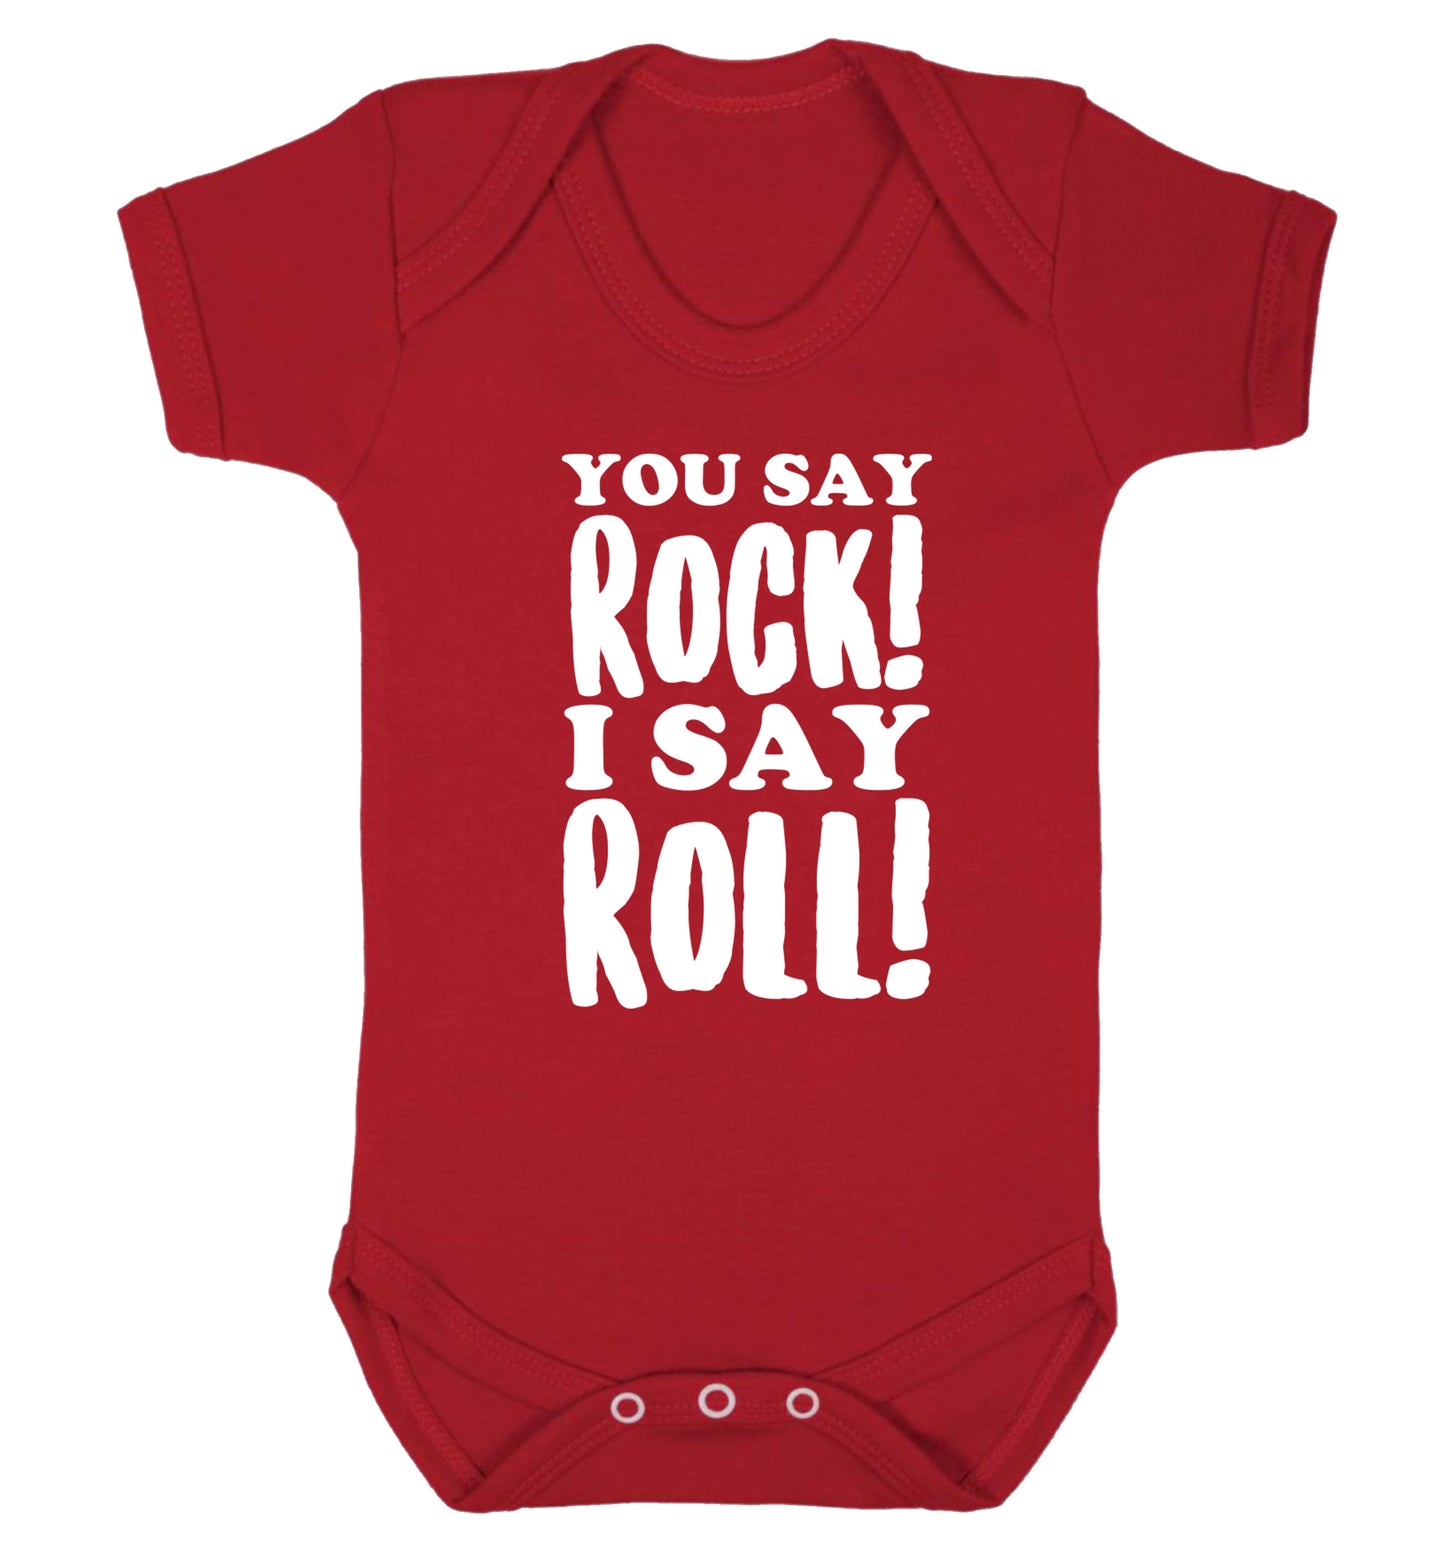 You say rock I say roll! Baby Vest red 18-24 months